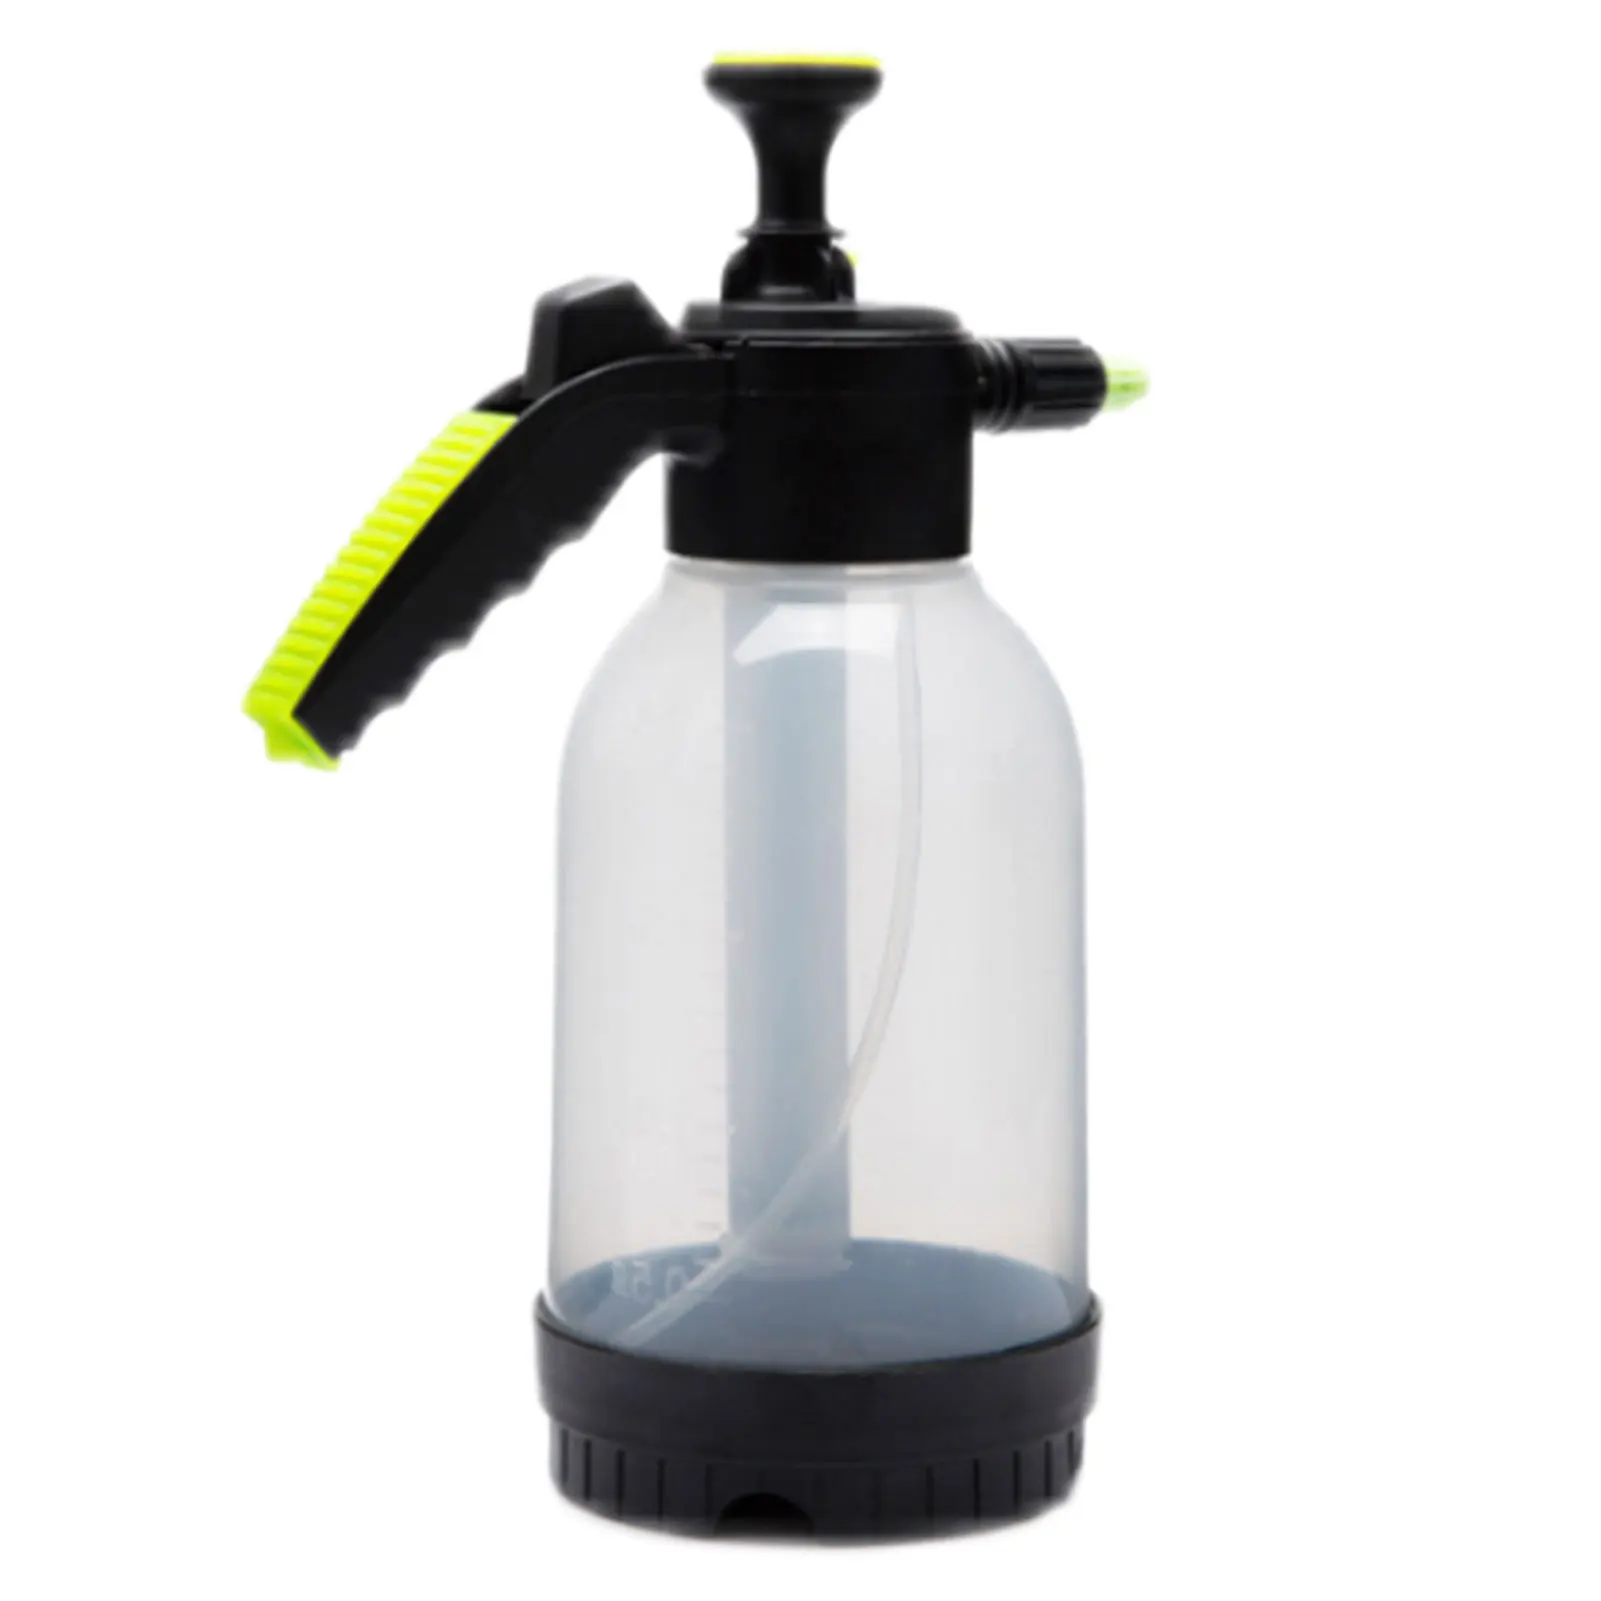 

Hand Pump Sprayer Empty Spray Bottles For Cleaning Solutions Acid And Alkali Resistant Safety Great Pressure Sprayers Foam